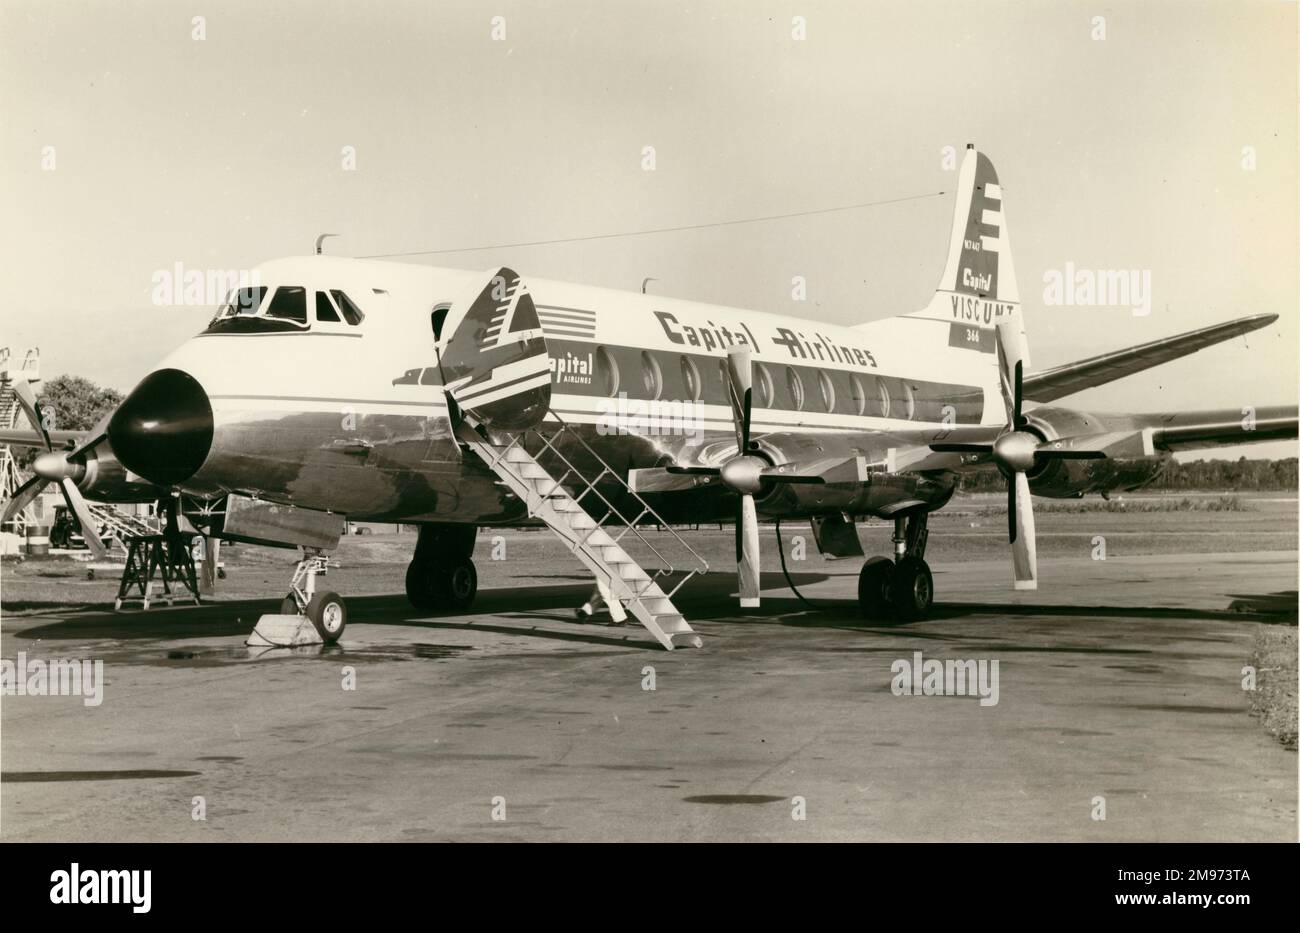 Vickers Viscount 744 of Capital Airlines. Stock Photo